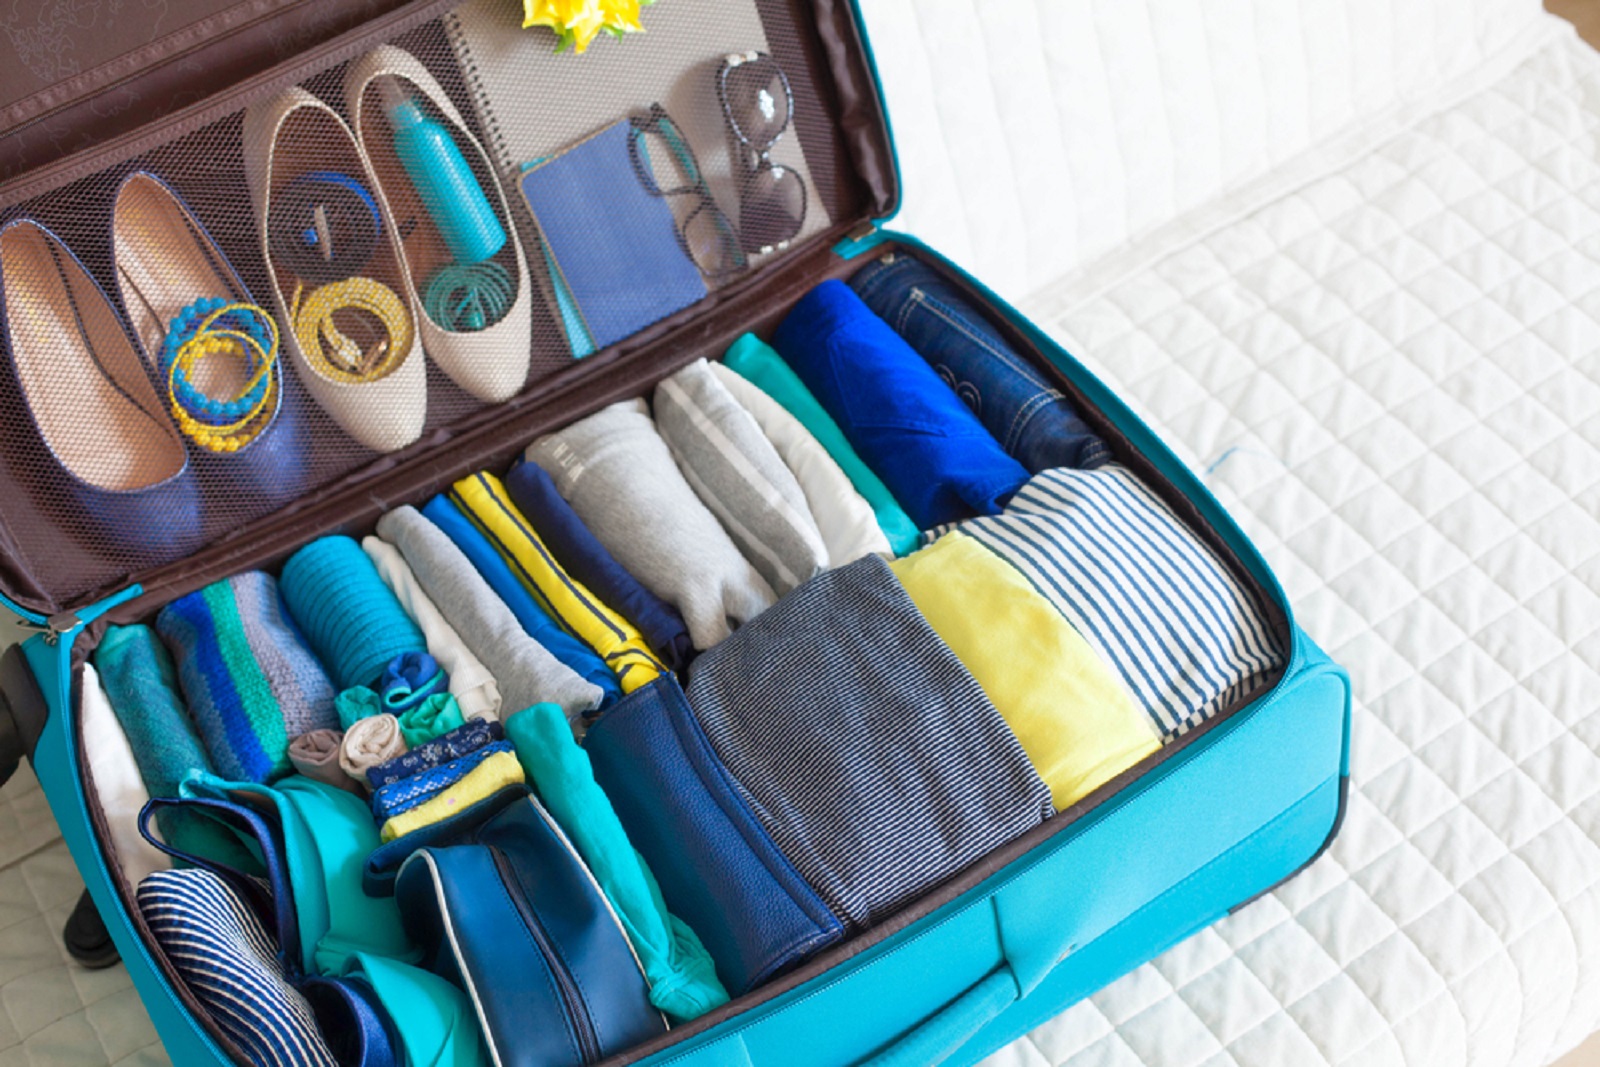 Nikki Parkinson recommends folding outfits in your suitcase